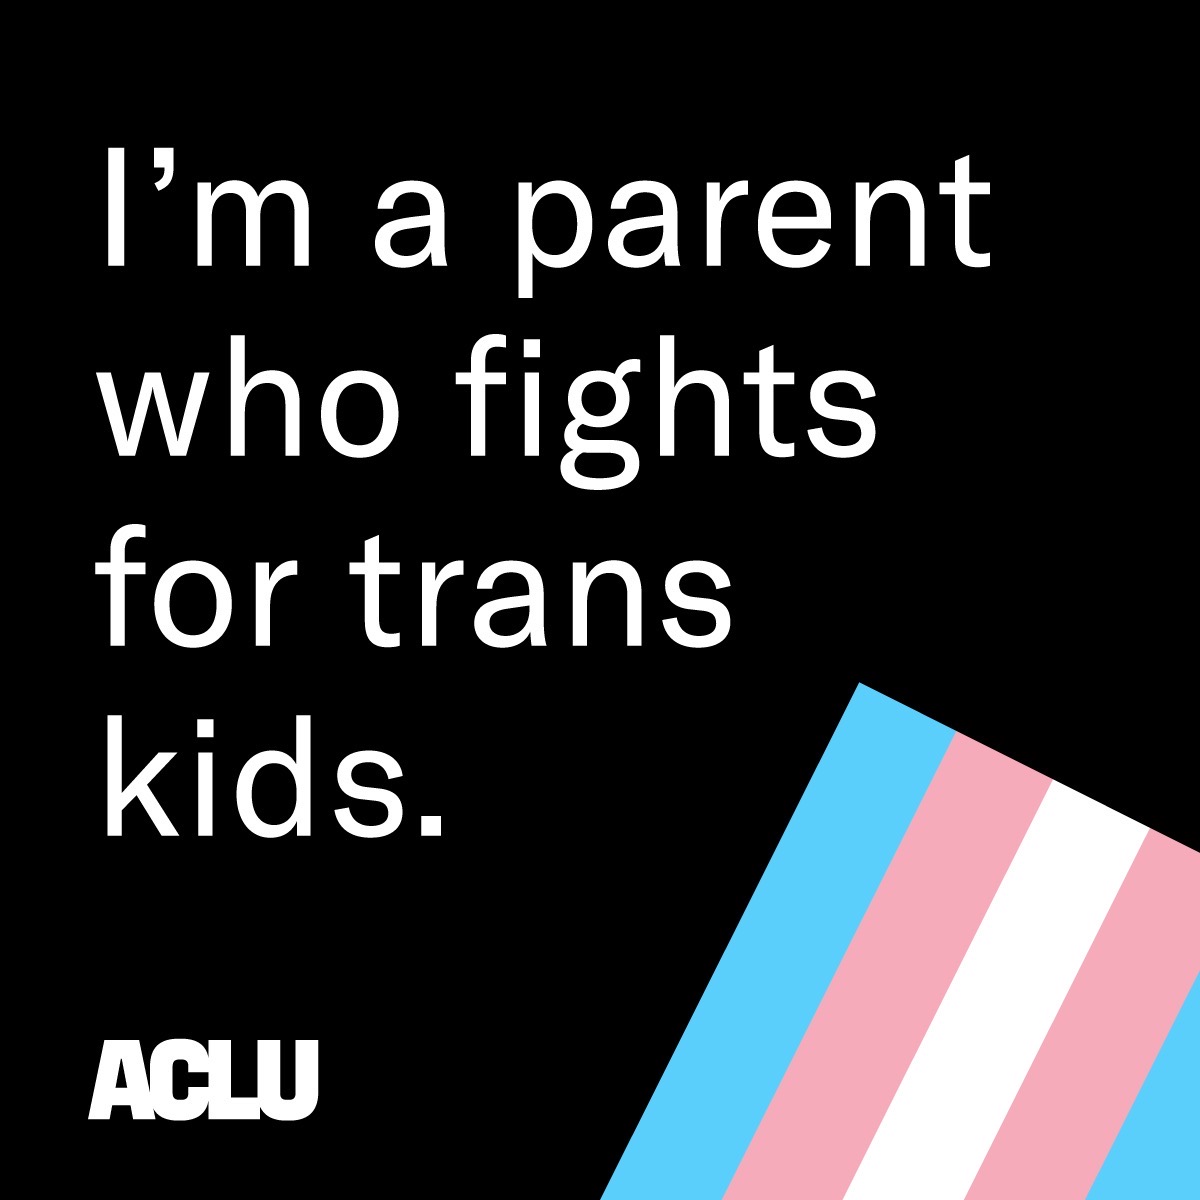 Trans youth need to know there are parents out there who have their backs against cruel political attacks on their safety and rights. Take the pledge today and share this graphic widely. aclu.org/transkidspledge